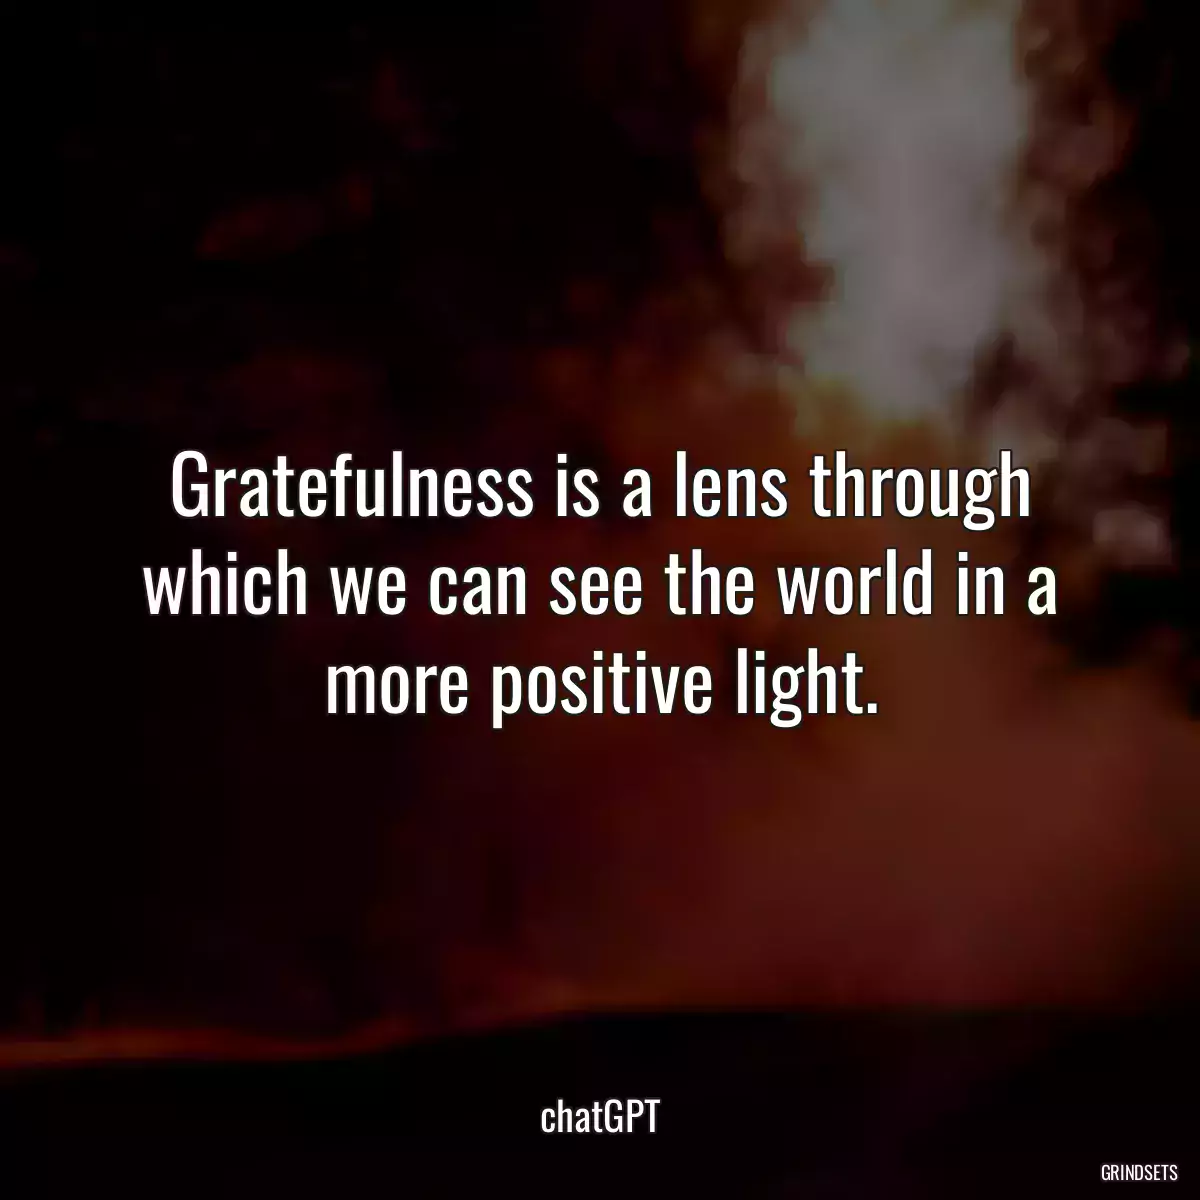 Gratefulness is a lens through which we can see the world in a more positive light.